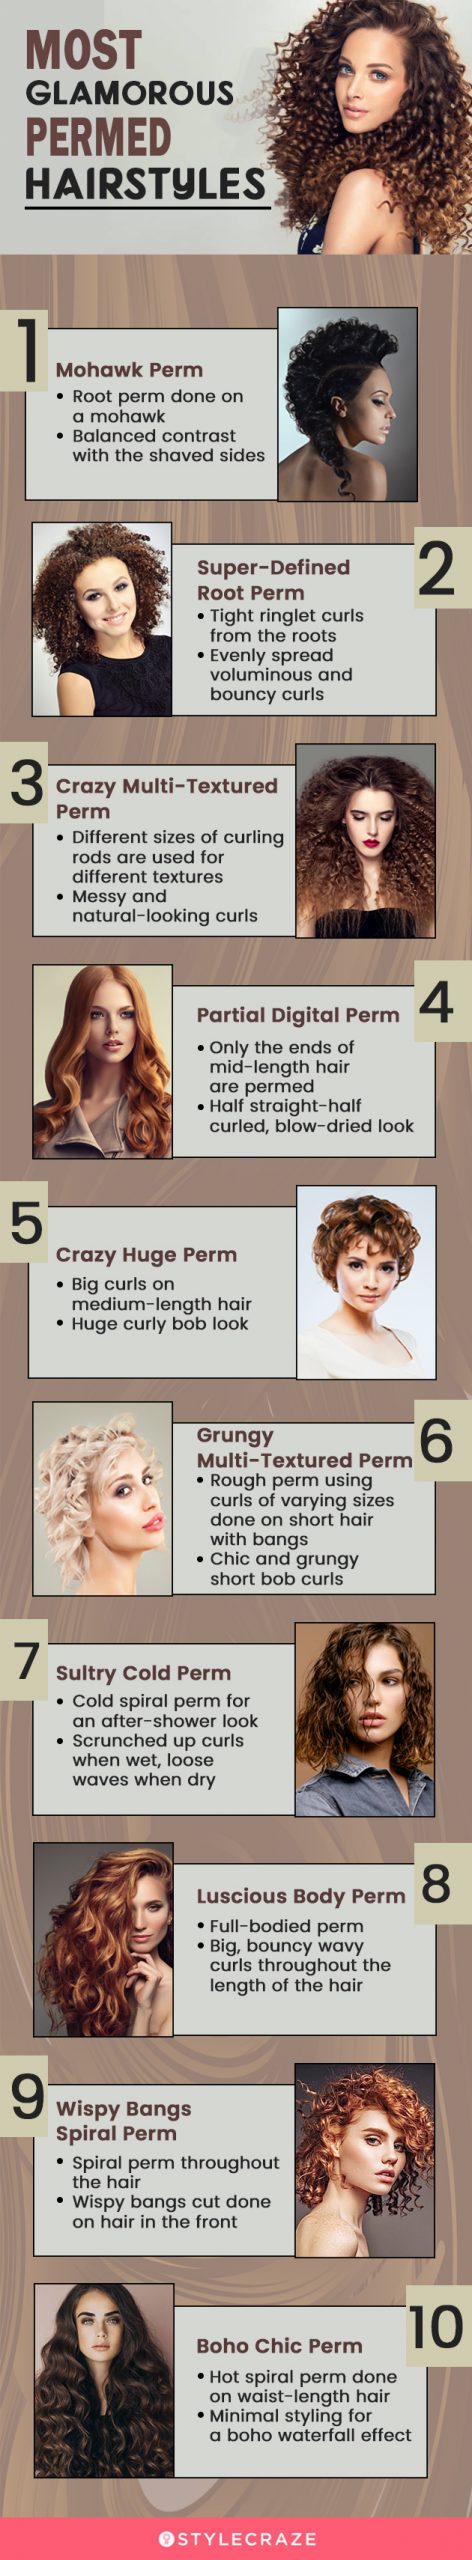 most glamorous permed hairstyles [infographic]